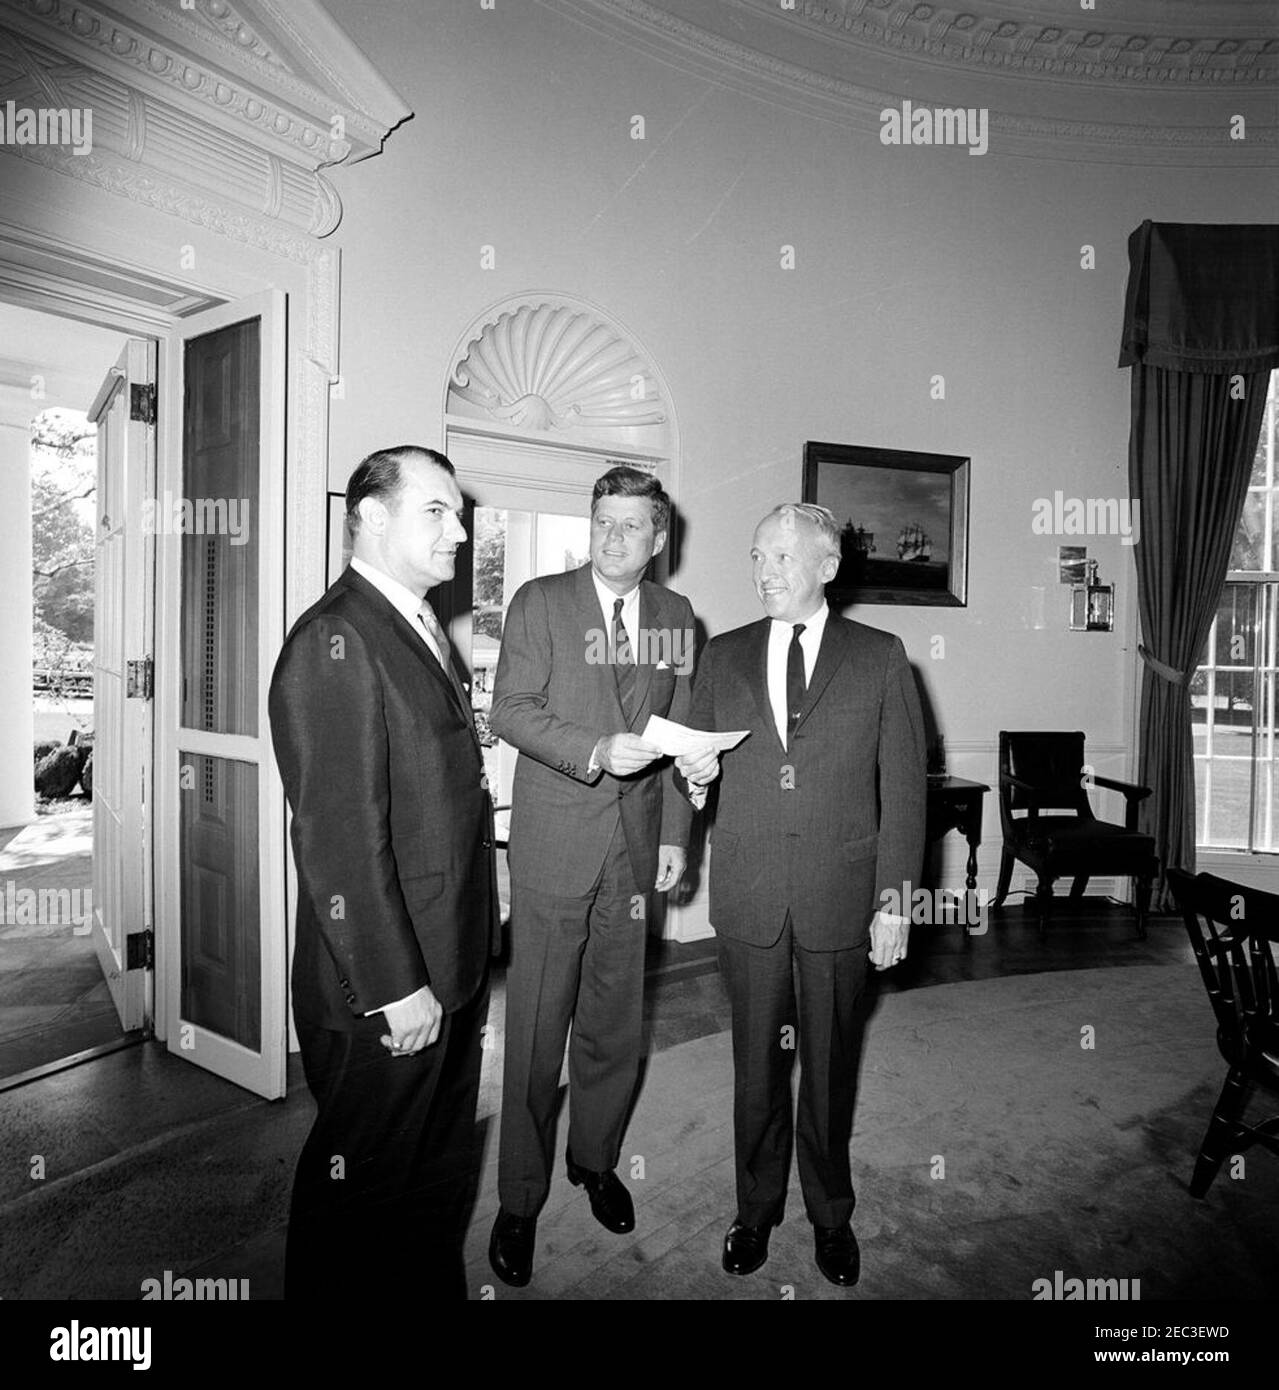 Visit of the Postmaster General J. Edward Day u0026 Chairman, United Givers Fund (UGF), 11:00AM. President John F. Kennedy stands with Postmaster General, J. Edward Day (right), and Chairman of the United Givers Fund of the National Capital Area, William Calomiris (left). Oval Office, White House, Washington, D.C. Stock Photo